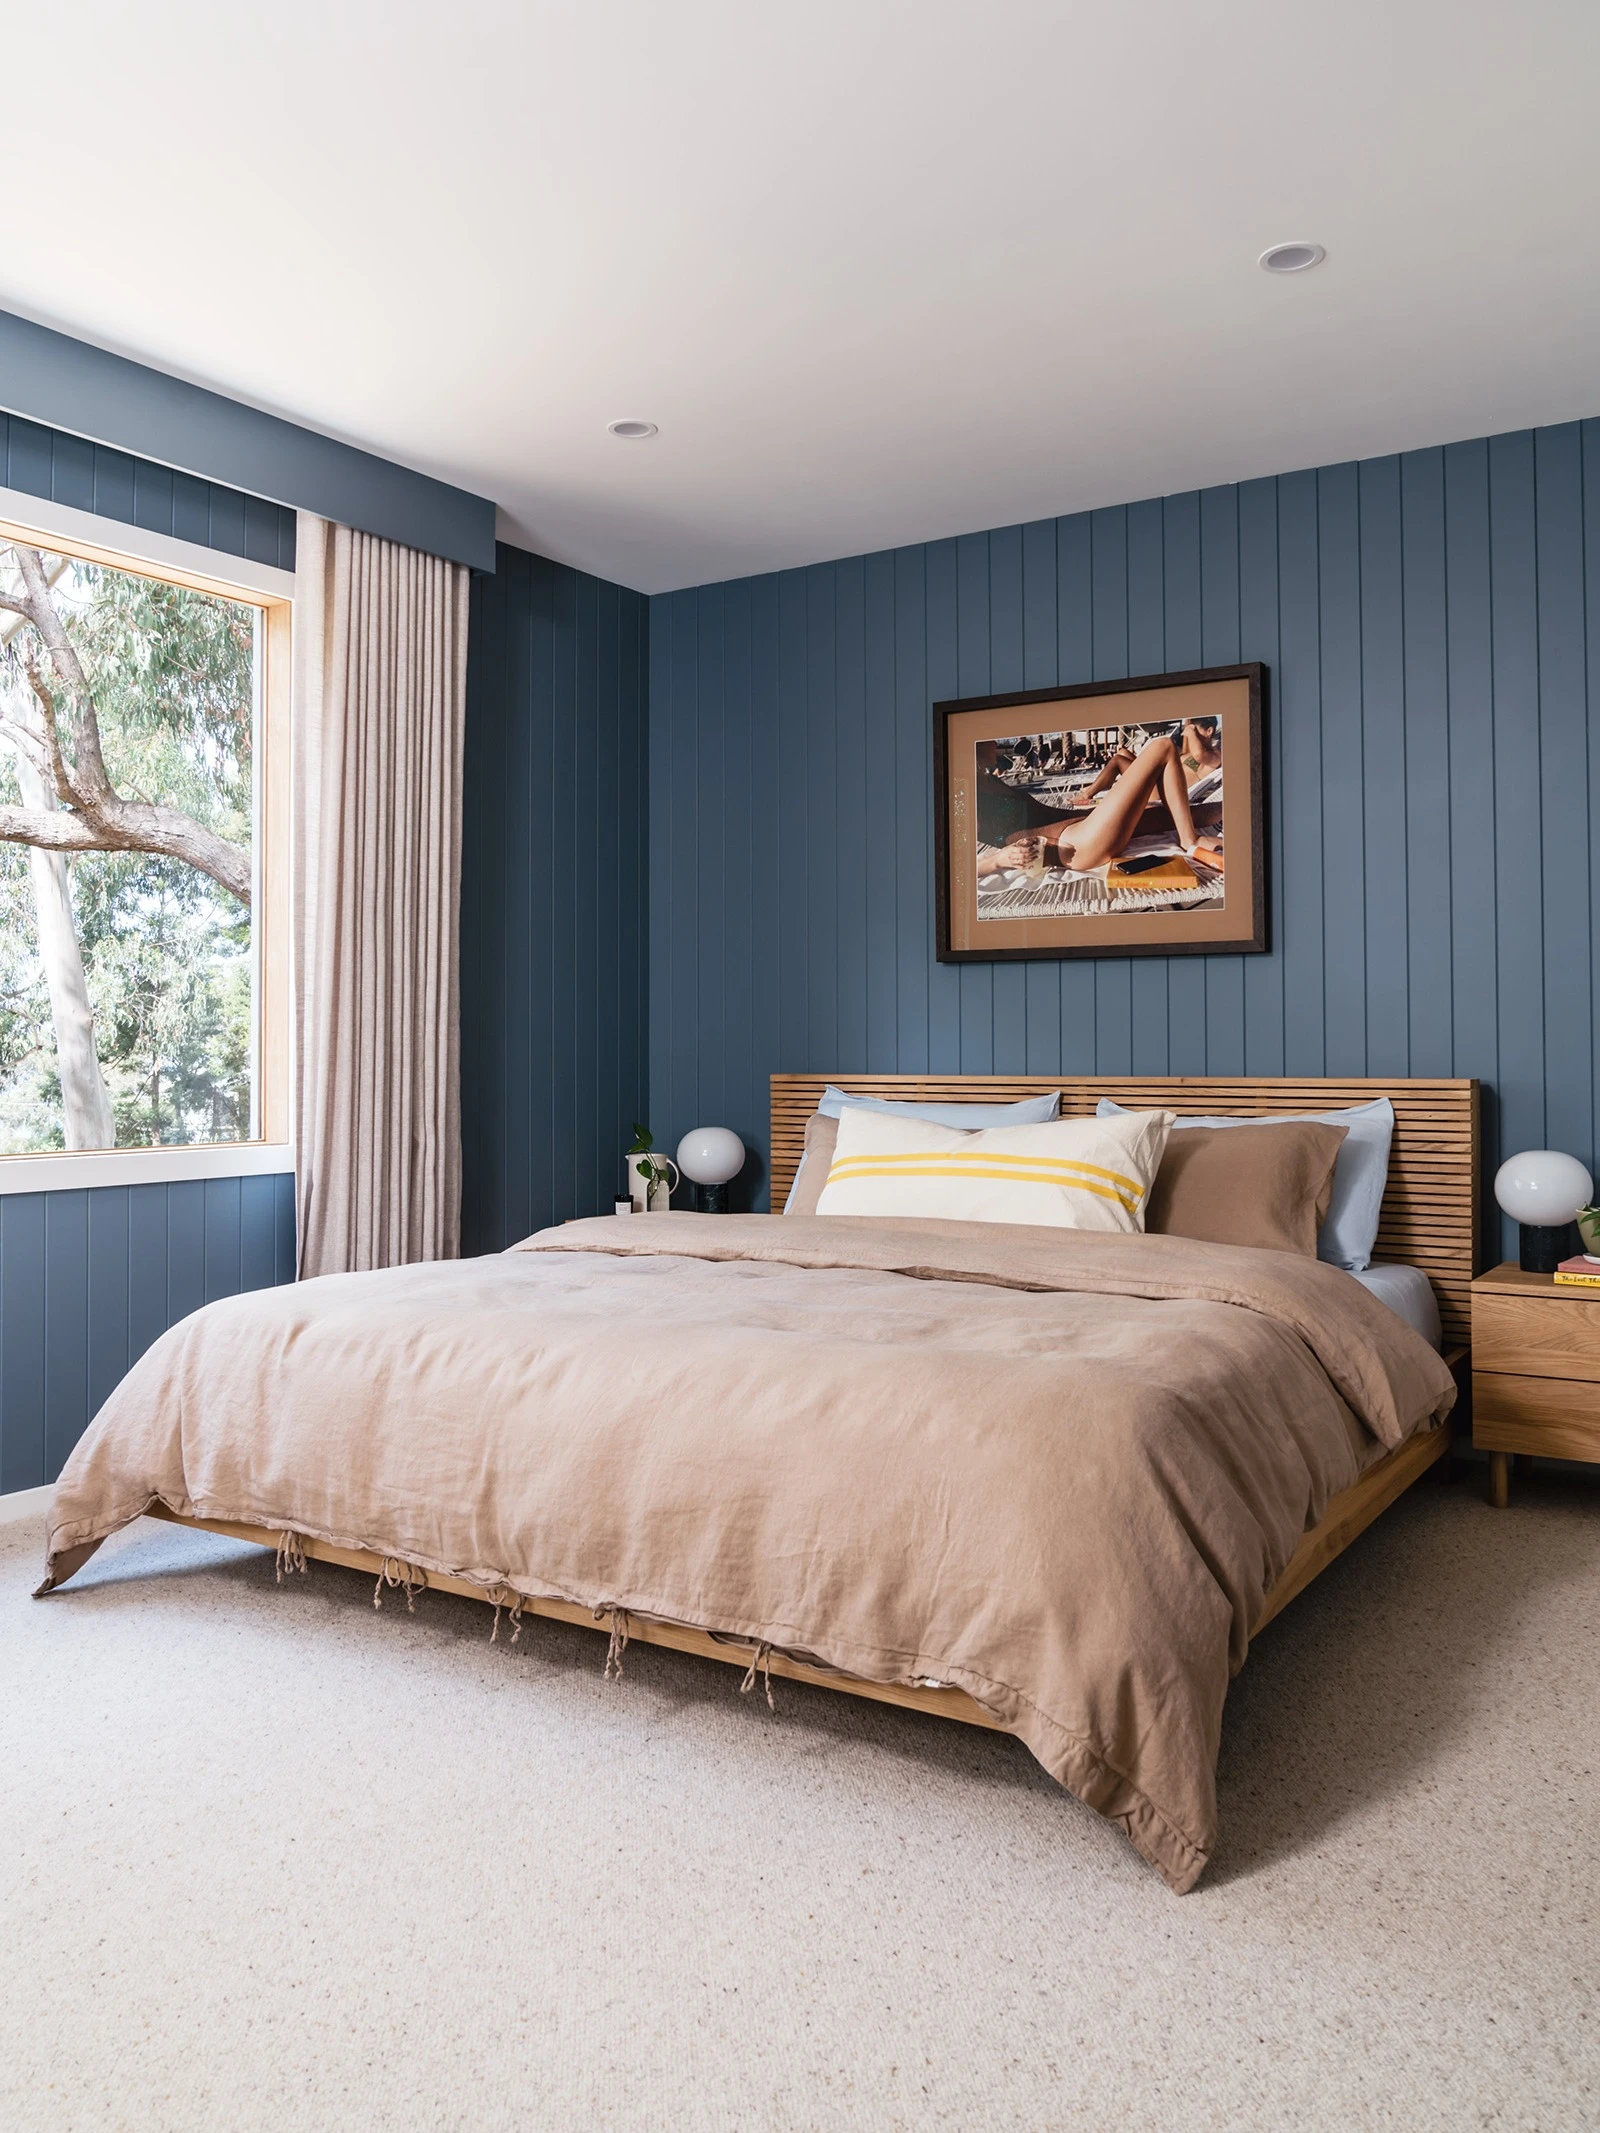 Guest bedroom with blue walls and white ceiling